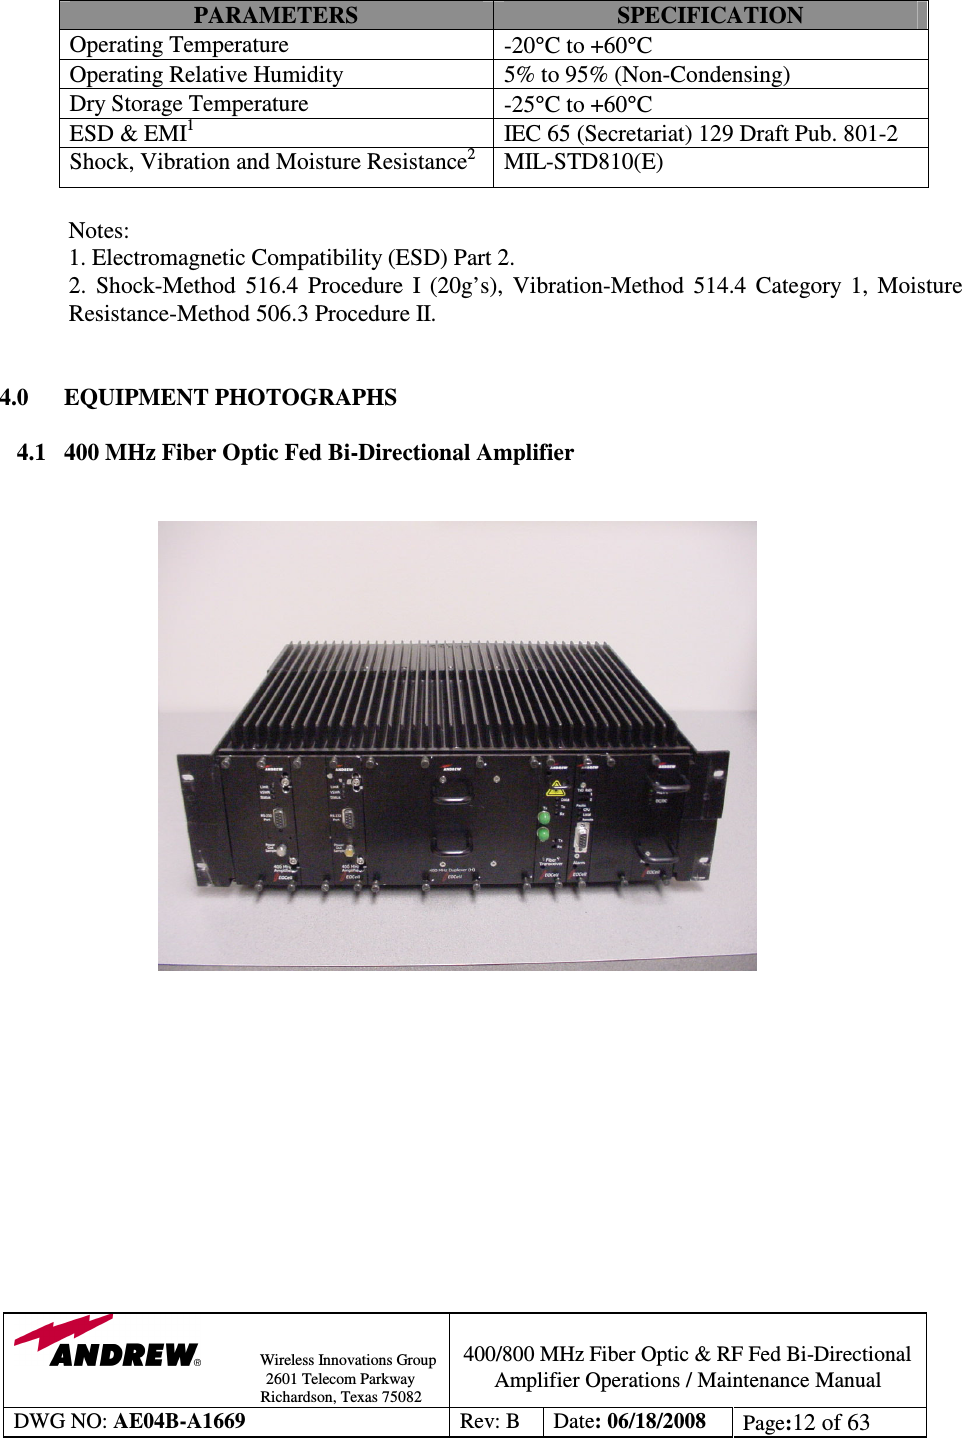                Wireless Innovations Group                                                                                        2601 Telecom Parkway                                                         Richardson, Texas 75082  400/800 MHz Fiber Optic &amp; RF Fed Bi-Directional Amplifier Operations / Maintenance Manual DWG NO: AE04B-A1669  Rev: B  Date: 06/18/2008  Page:12 of 63  PARAMETERS  SPECIFICATION Operating Temperature   -20°C to +60°C Operating Relative Humidity  5% to 95% (Non-Condensing) Dry Storage Temperature  -25°C to +60°C  ESD &amp; EMI1  IEC 65 (Secretariat) 129 Draft Pub. 801-2 Shock, Vibration and Moisture Resistance2  MIL-STD810(E)  Notes:                         1. Electromagnetic Compatibility (ESD) Part 2.   2.  Shock-Method  516.4  Procedure  I  (20g’s),  Vibration-Method  514.4  Category  1,  Moisture Resistance-Method 506.3 Procedure II.                  4.0      EQUIPMENT PHOTOGRAPHS  4.1   400 MHz Fiber Optic Fed Bi-Directional Amplifier                                    